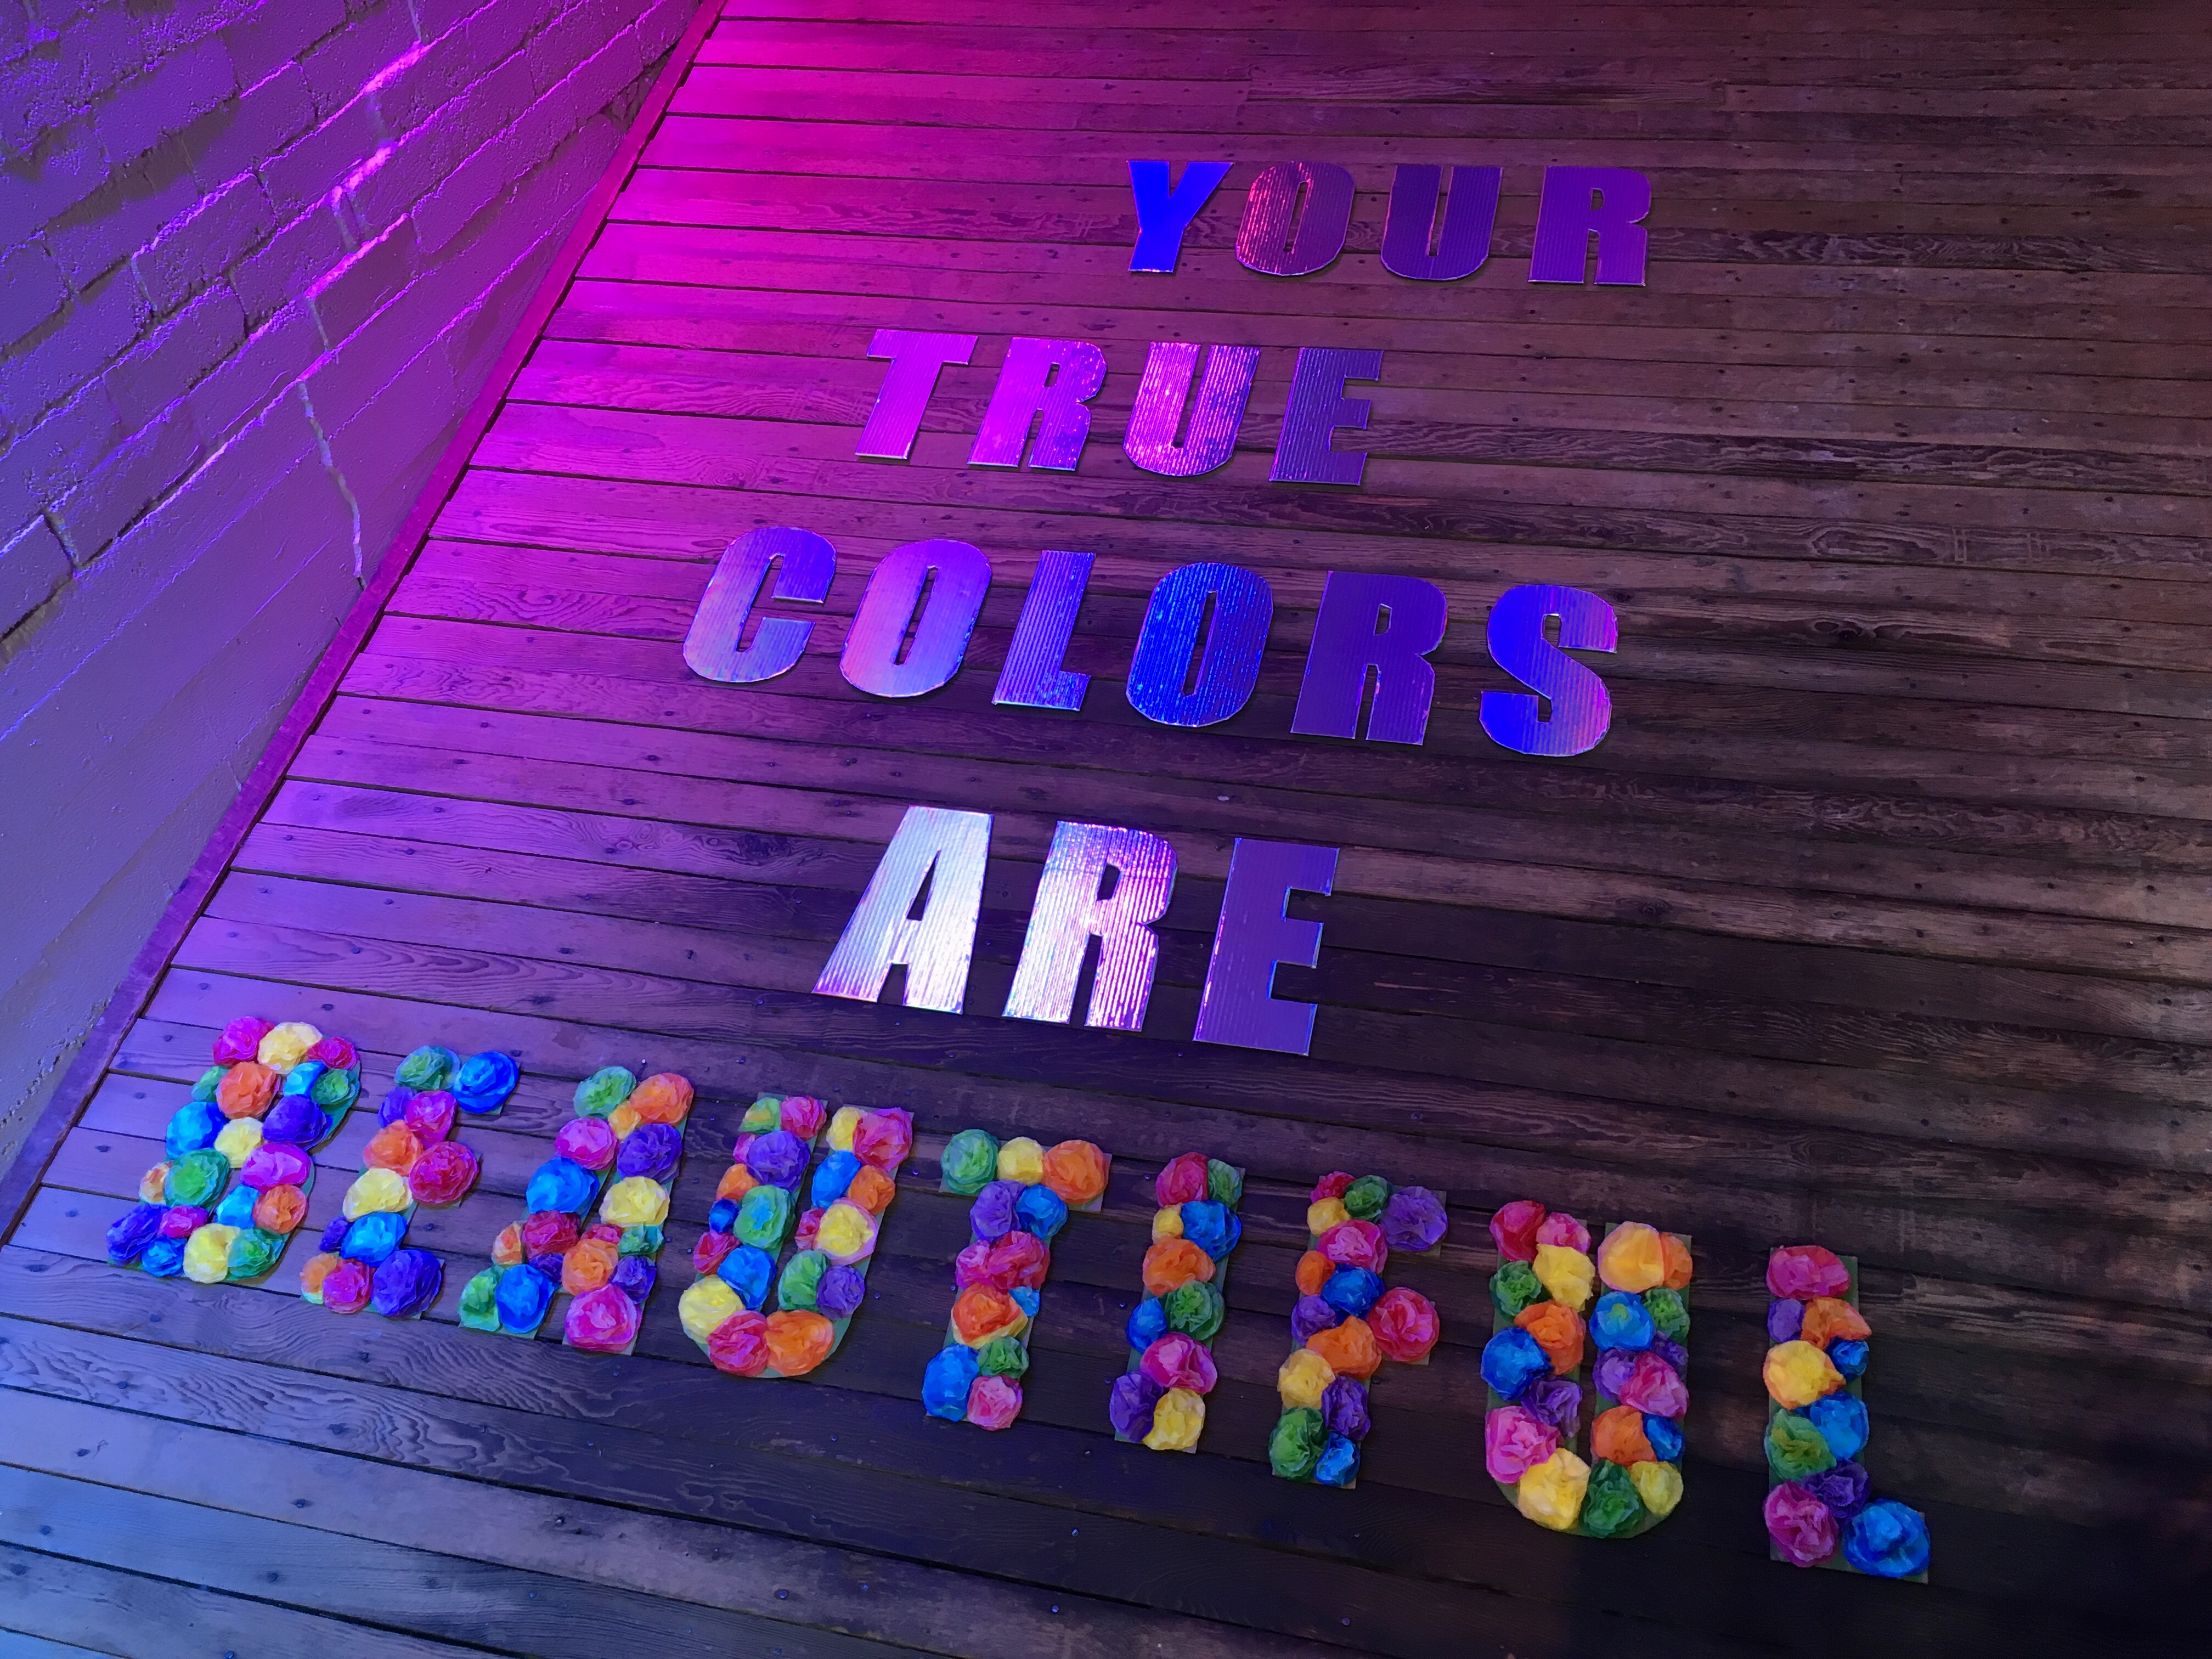 True Colors, Art Installation, May 2018. Gia Valente